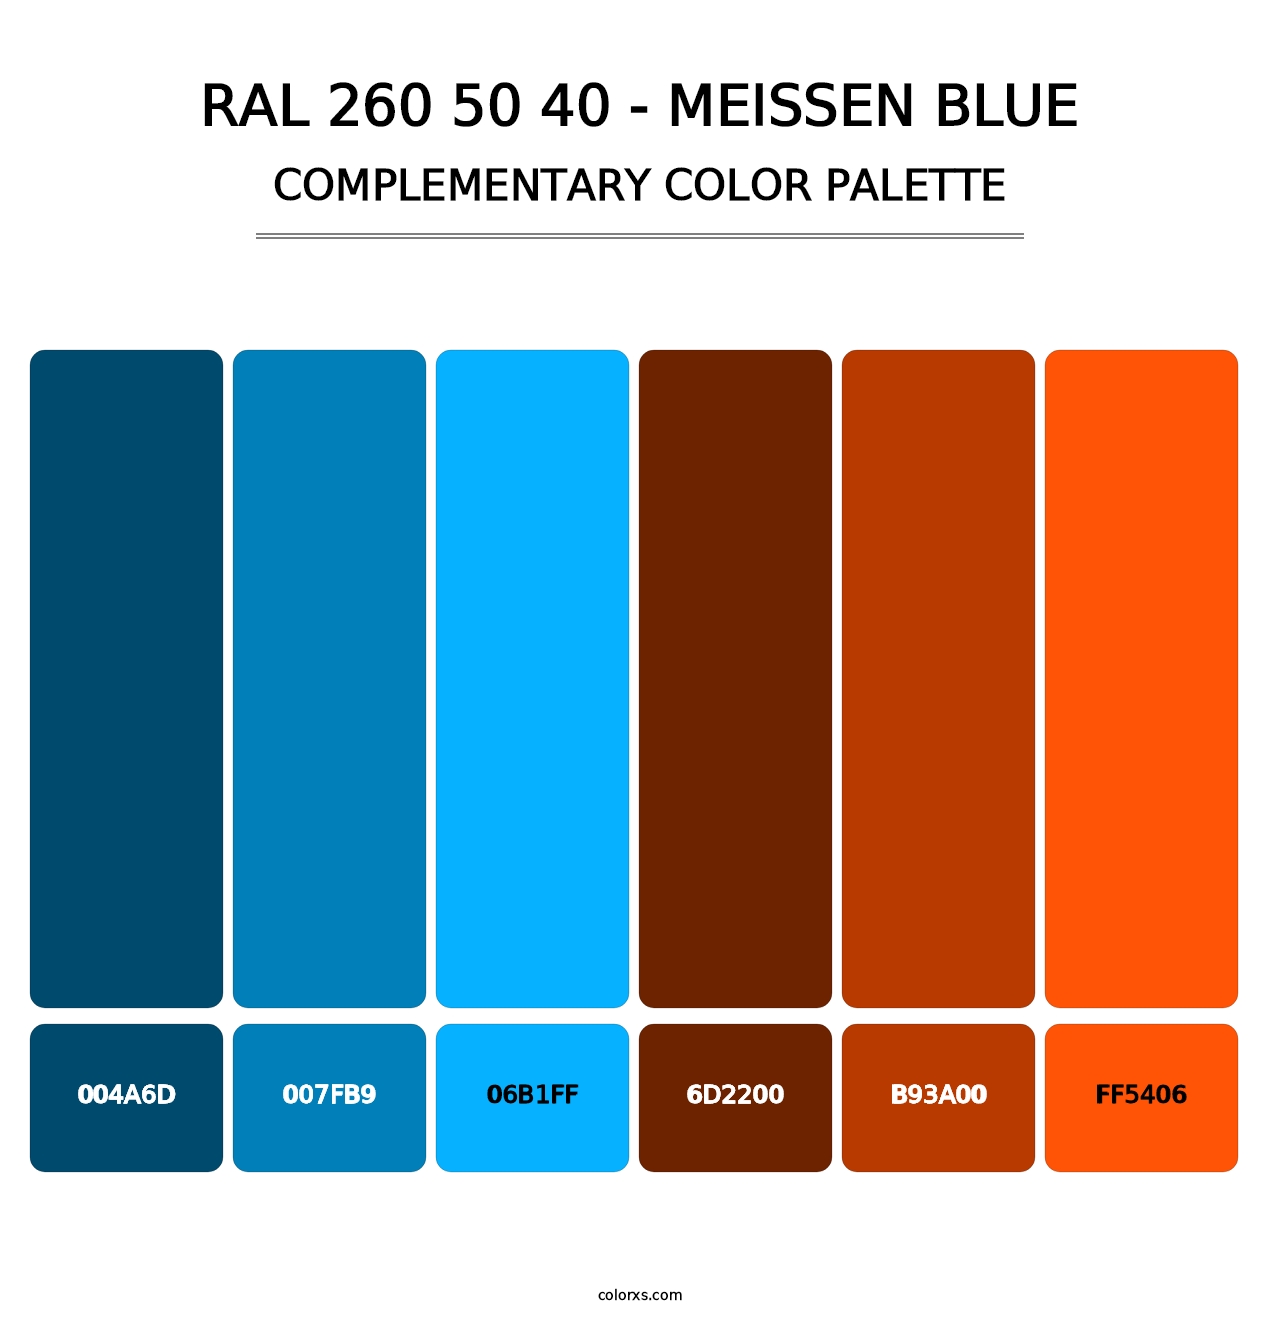 RAL 260 50 40 - Meissen Blue - Complementary Color Palette